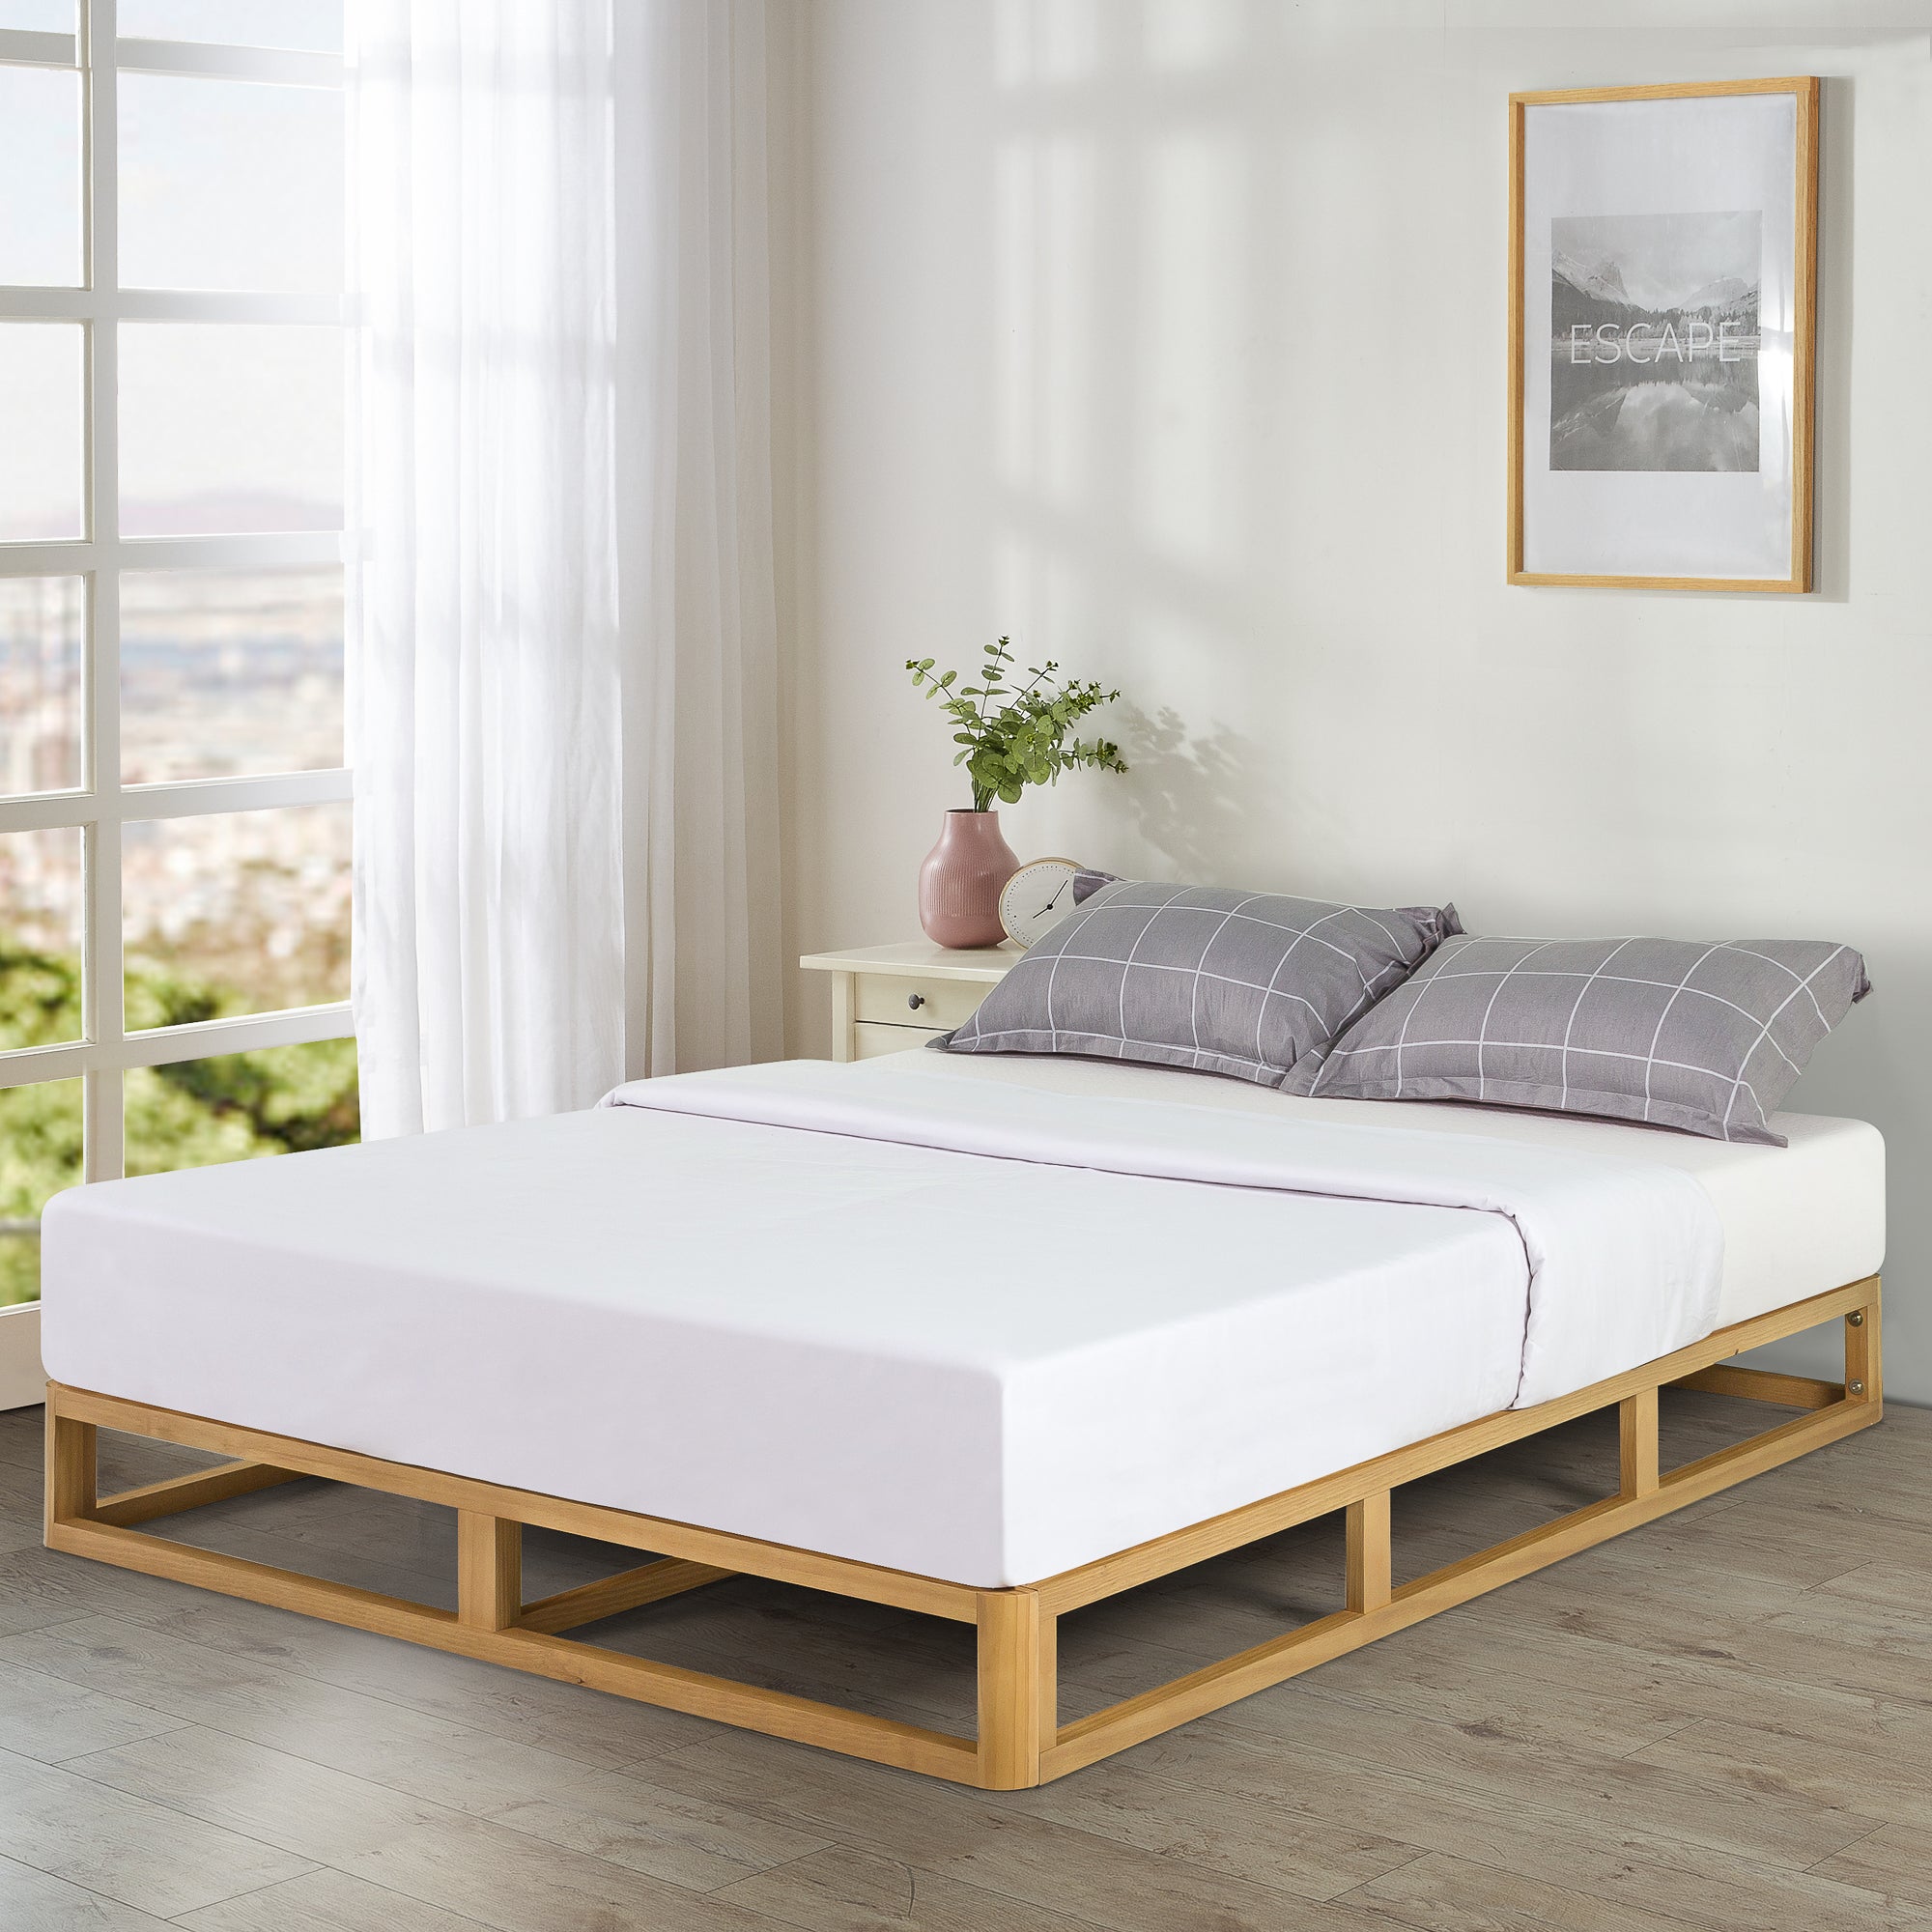 Zinus Industrial Solid Wood Timber Bed Frame Double, Queen & King